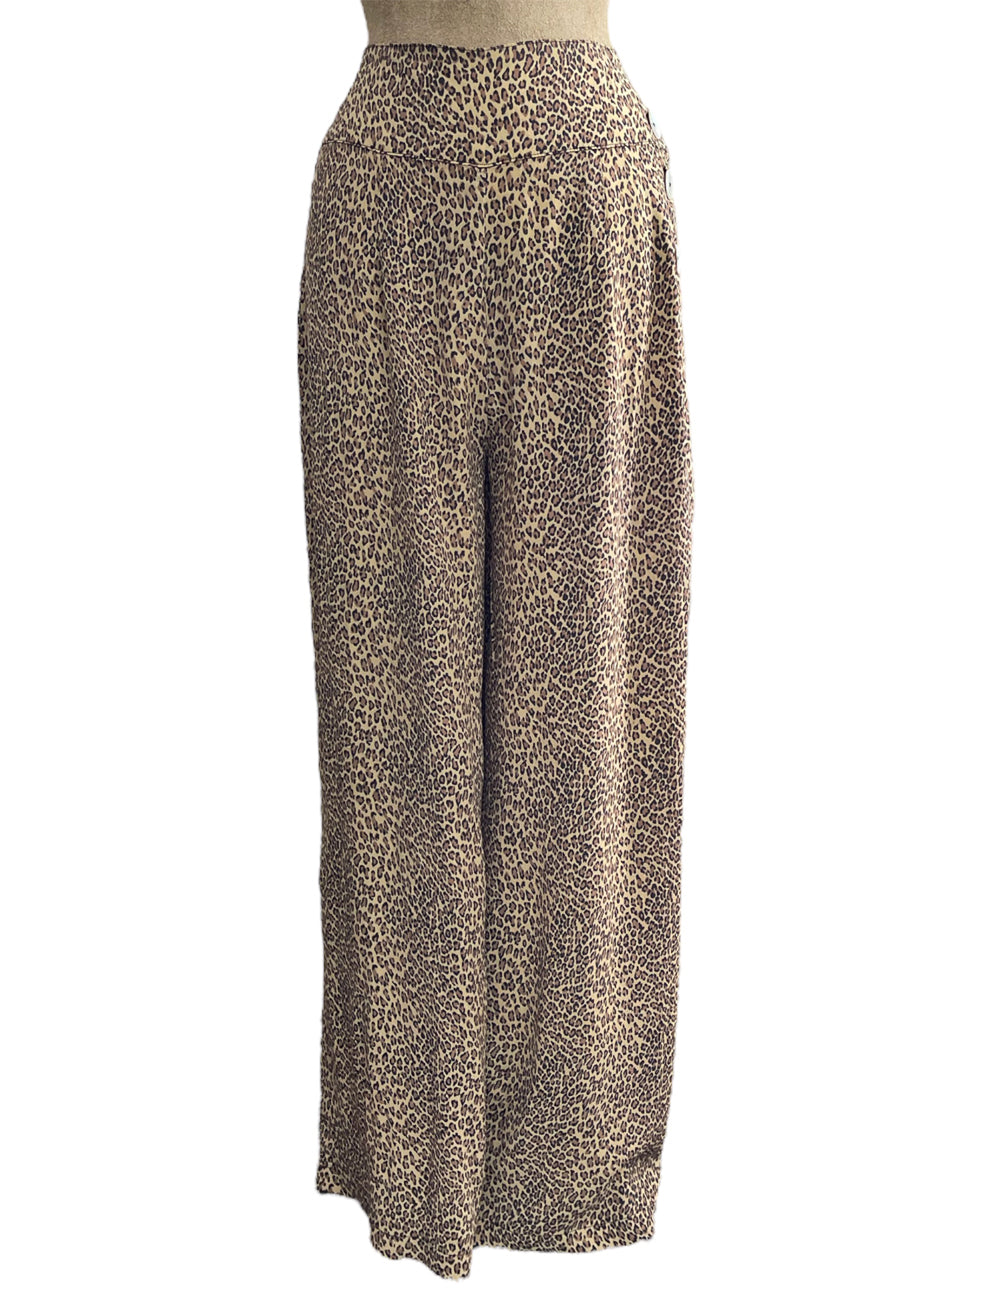 Leopard Print Retro 1940s Style High Waisted Palazzo Pants